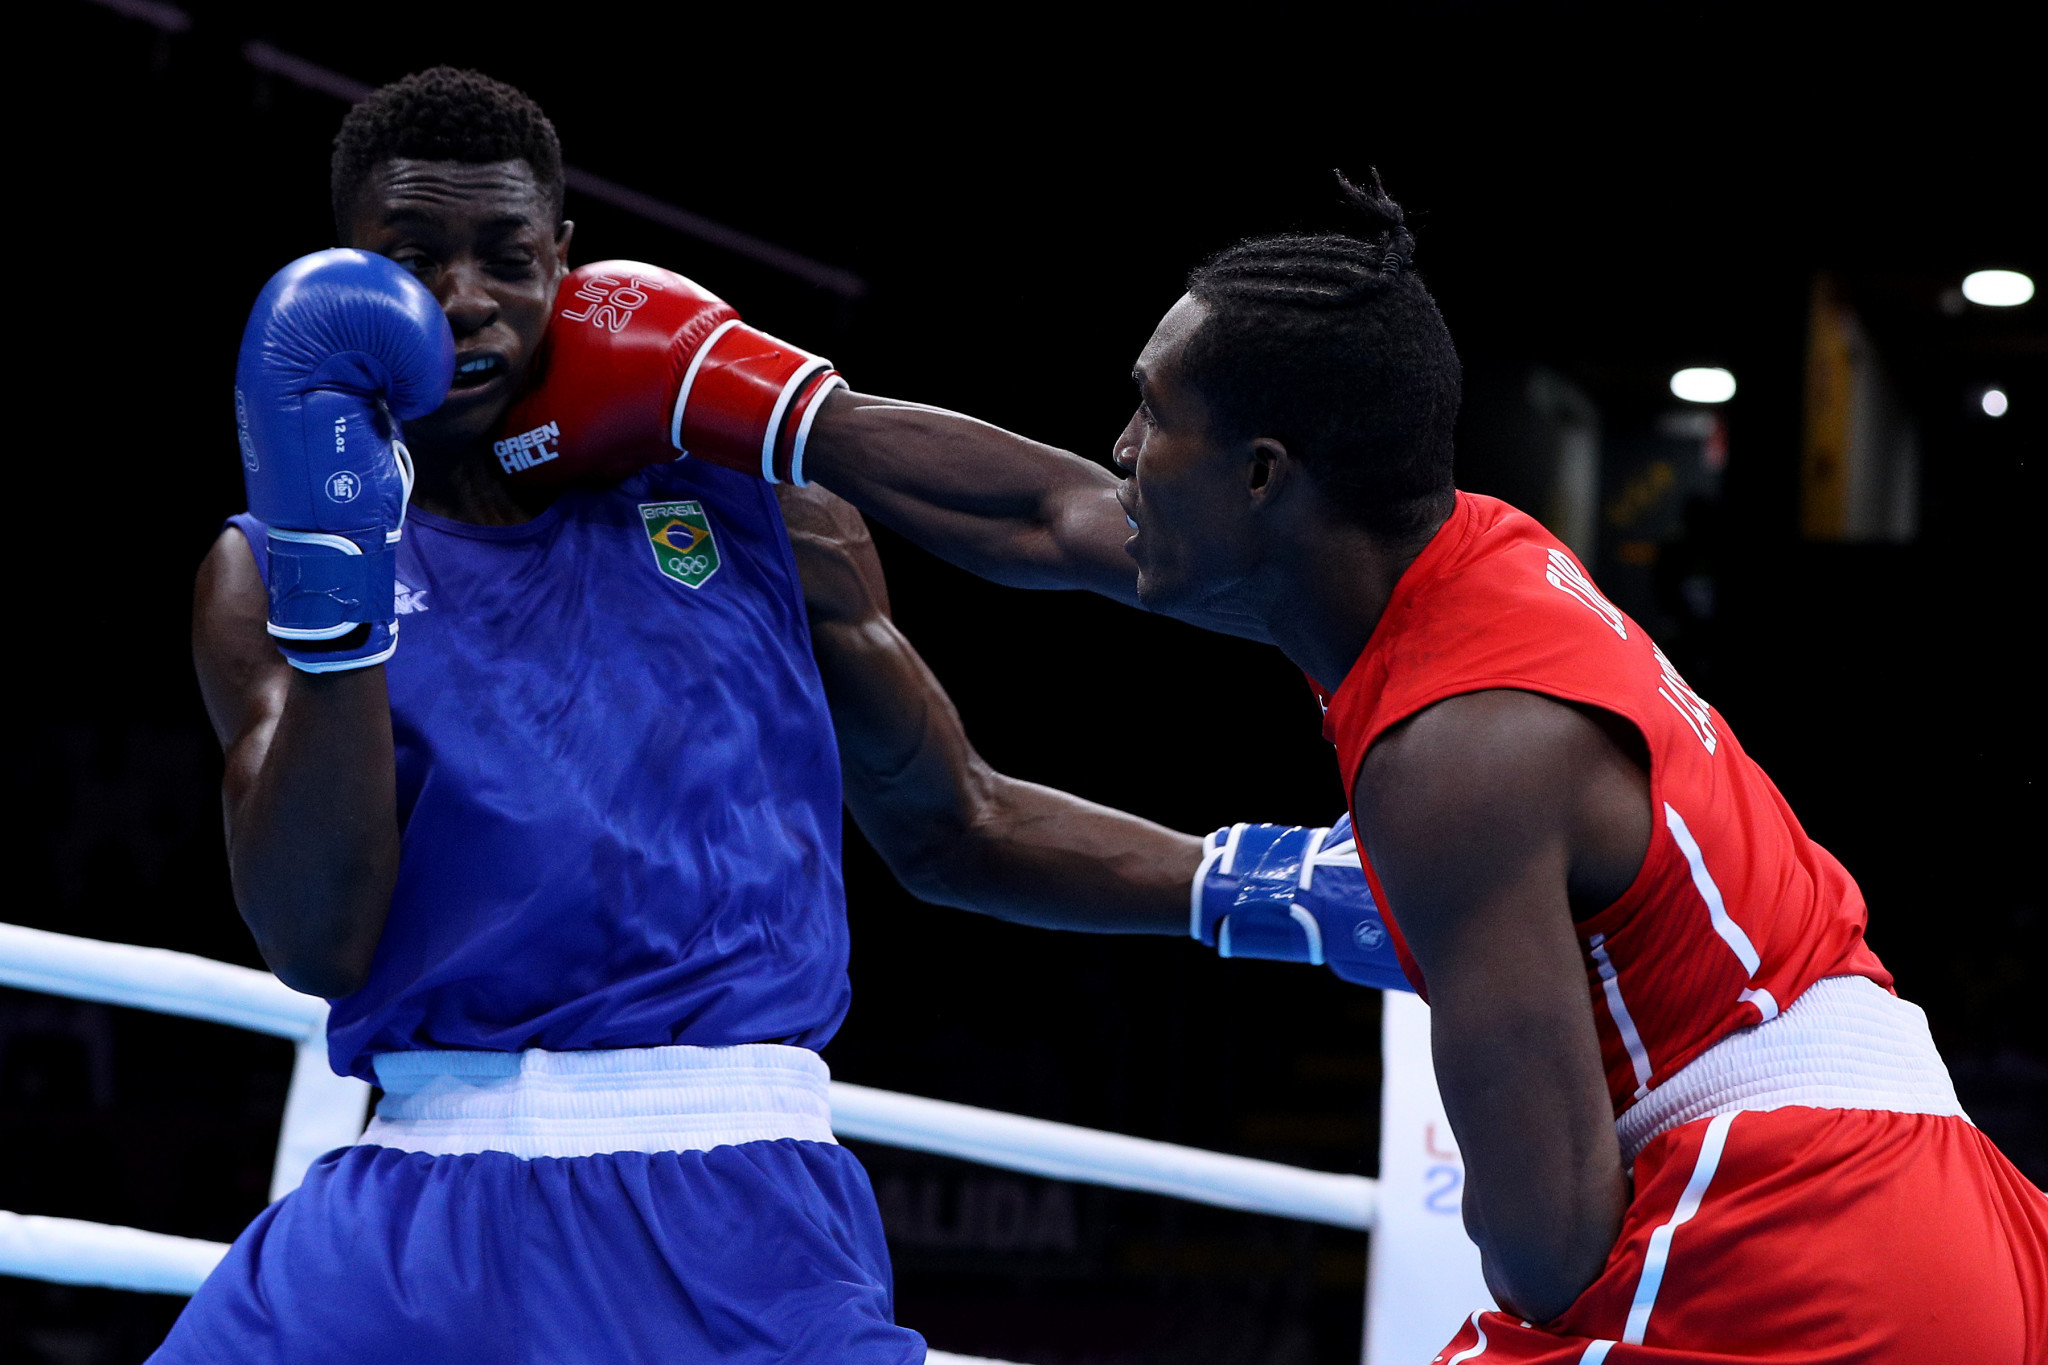 Julio La Cruz, right, won heavyweight gold at Tokyo 2020, but was denied a fifth consecutive AIBA World Boxing Championships gold at Yekaterinburg in 2019 ©Getty Images